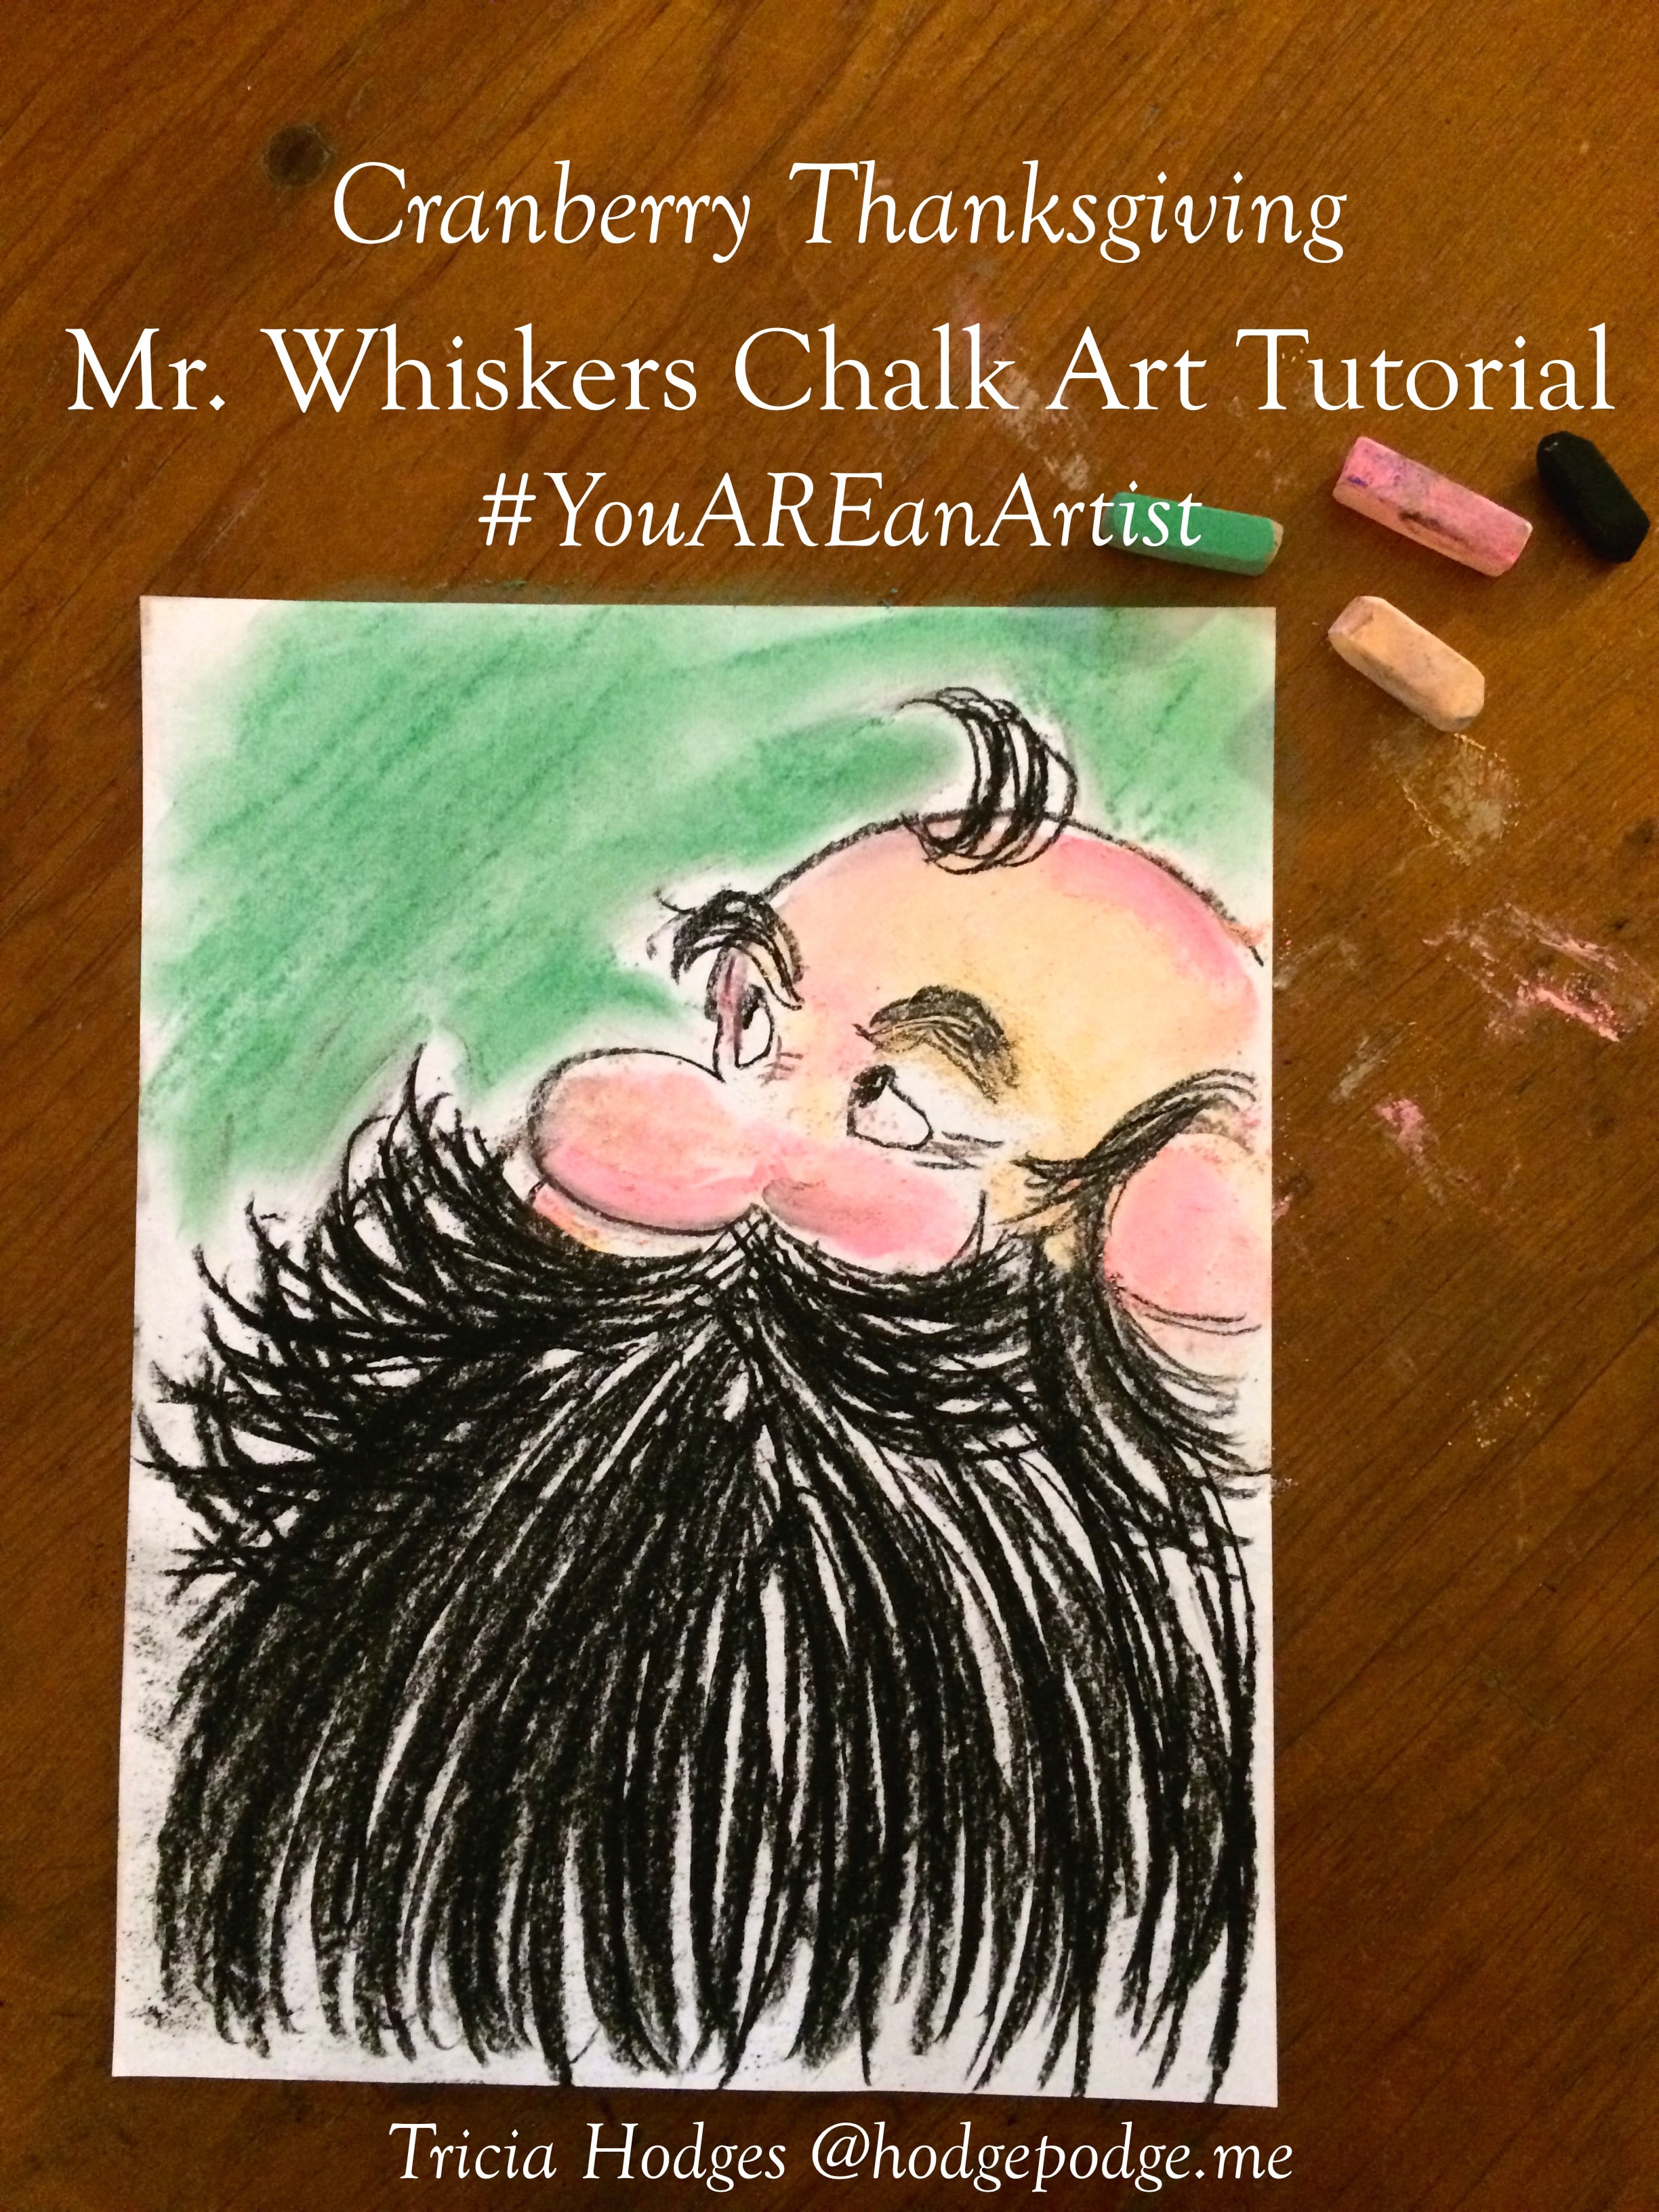 Cranberry Thanksgiving Mr. Whiskers Chalk Art Tutorial